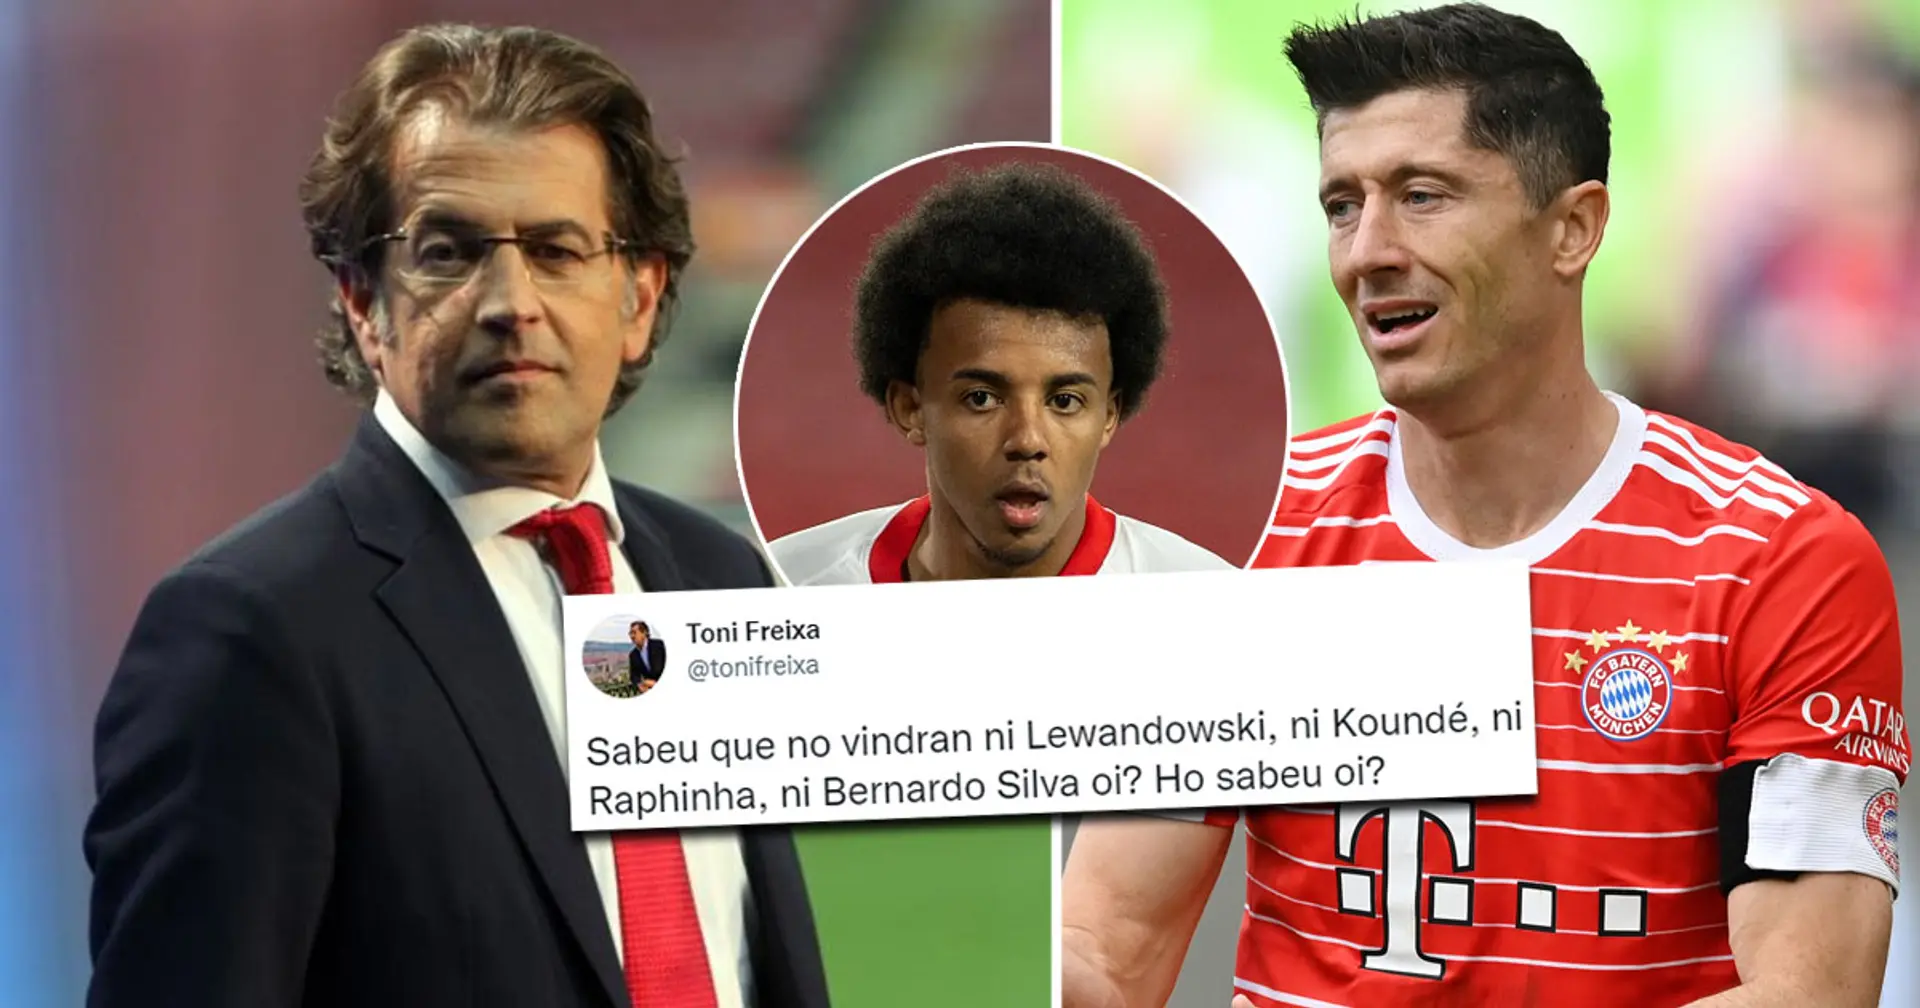 'They are selling smoke': ex-presidential candidate Freixa says Barca won't sign Lewandowski and other top targets